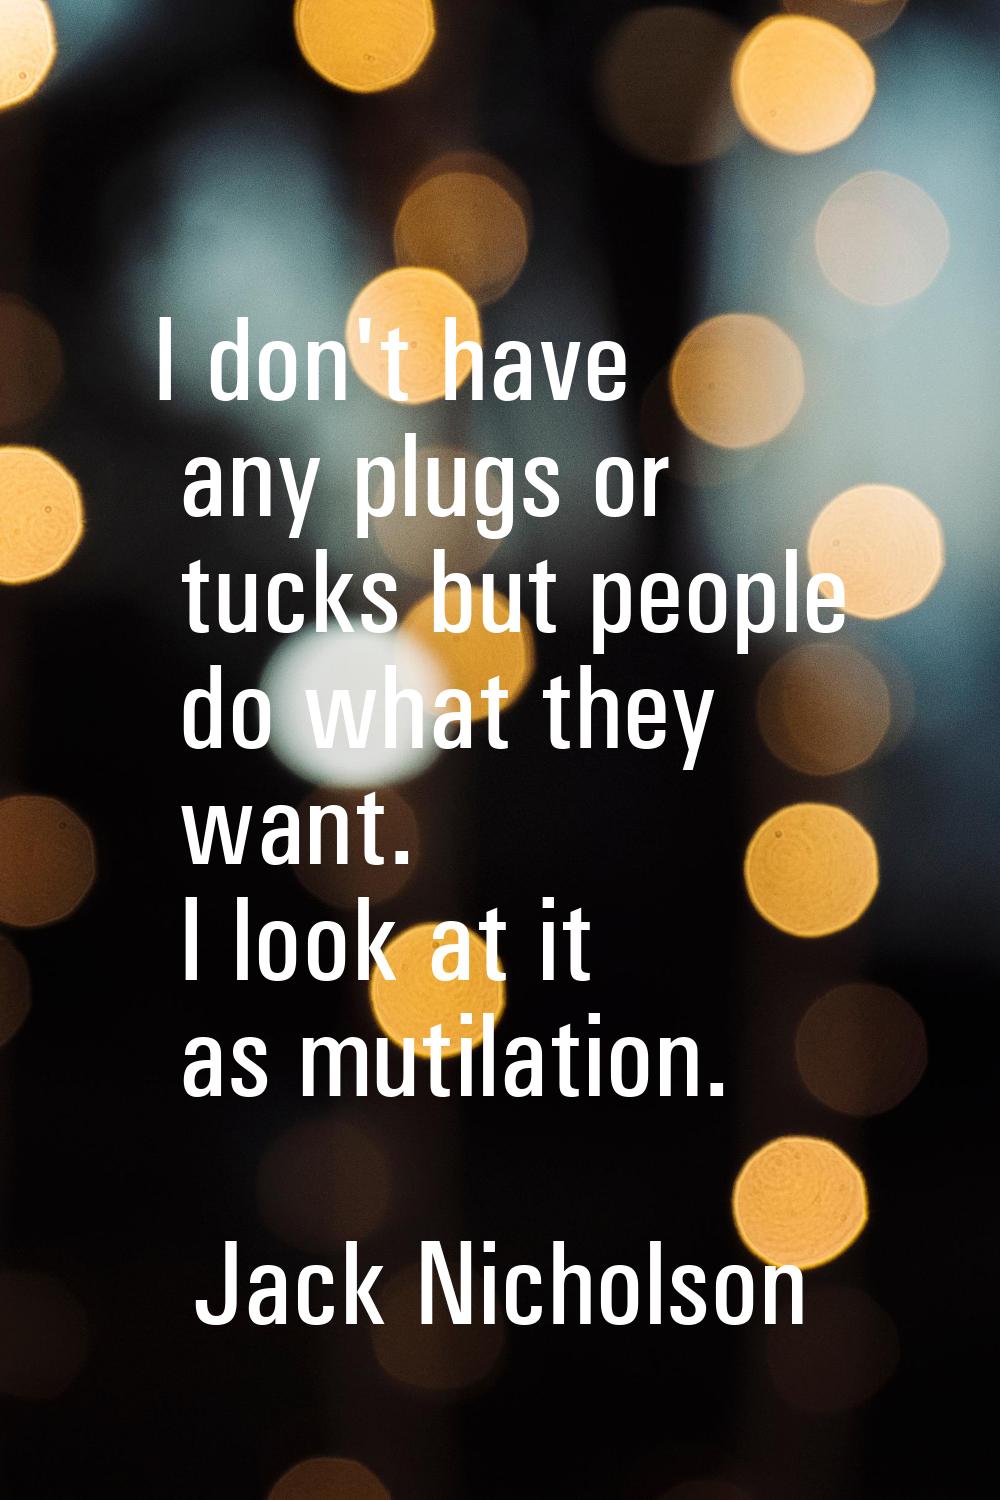 I don't have any plugs or tucks but people do what they want. I look at it as mutilation.